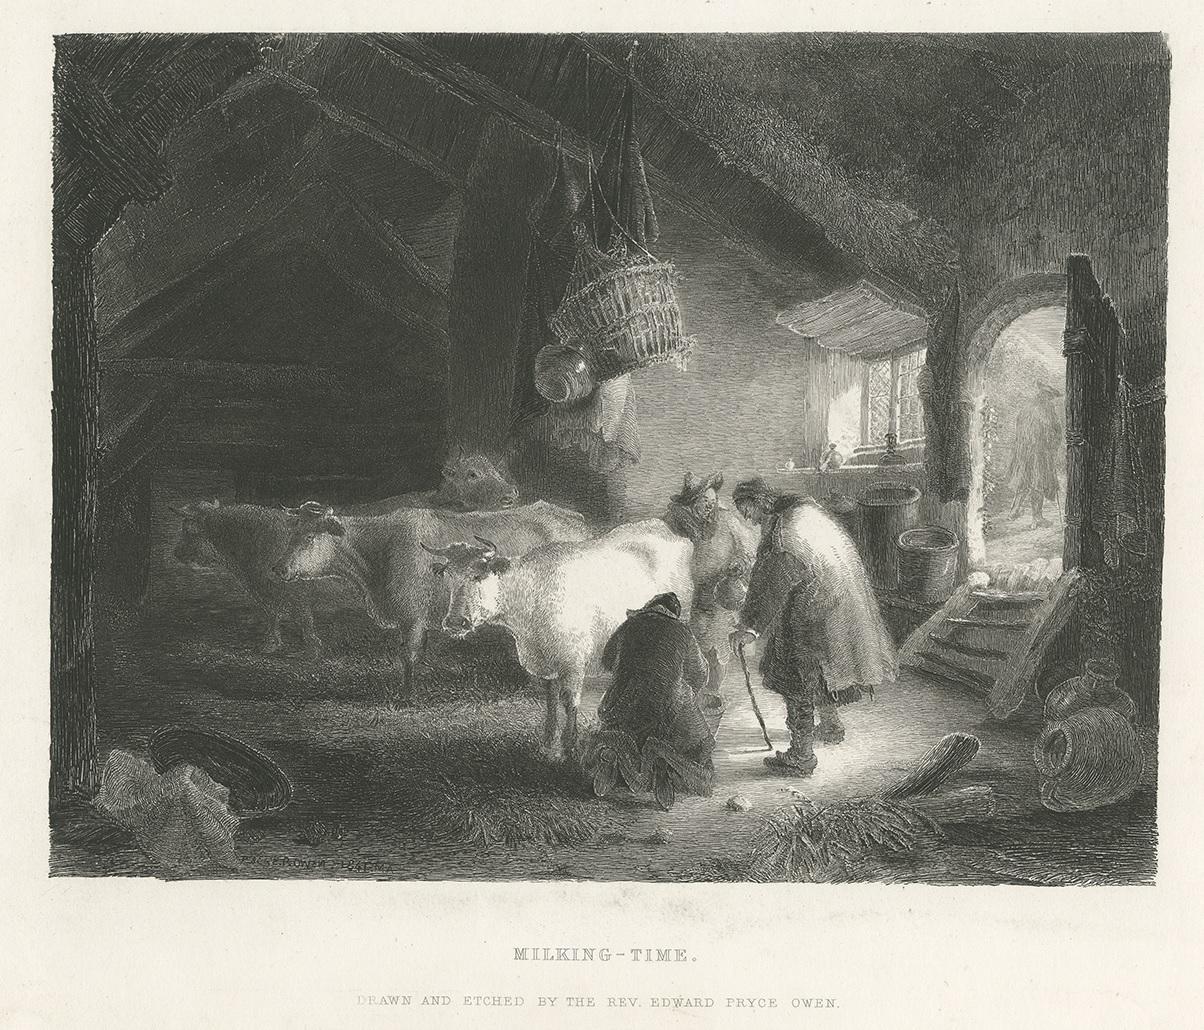 Antique print titled 'Milking-Time'. Steel engraving of the interior of a barn with light coming through a casement window and open door to right, where a man is watching a woman milk a cow, another man approaching with a jug, with two other cows